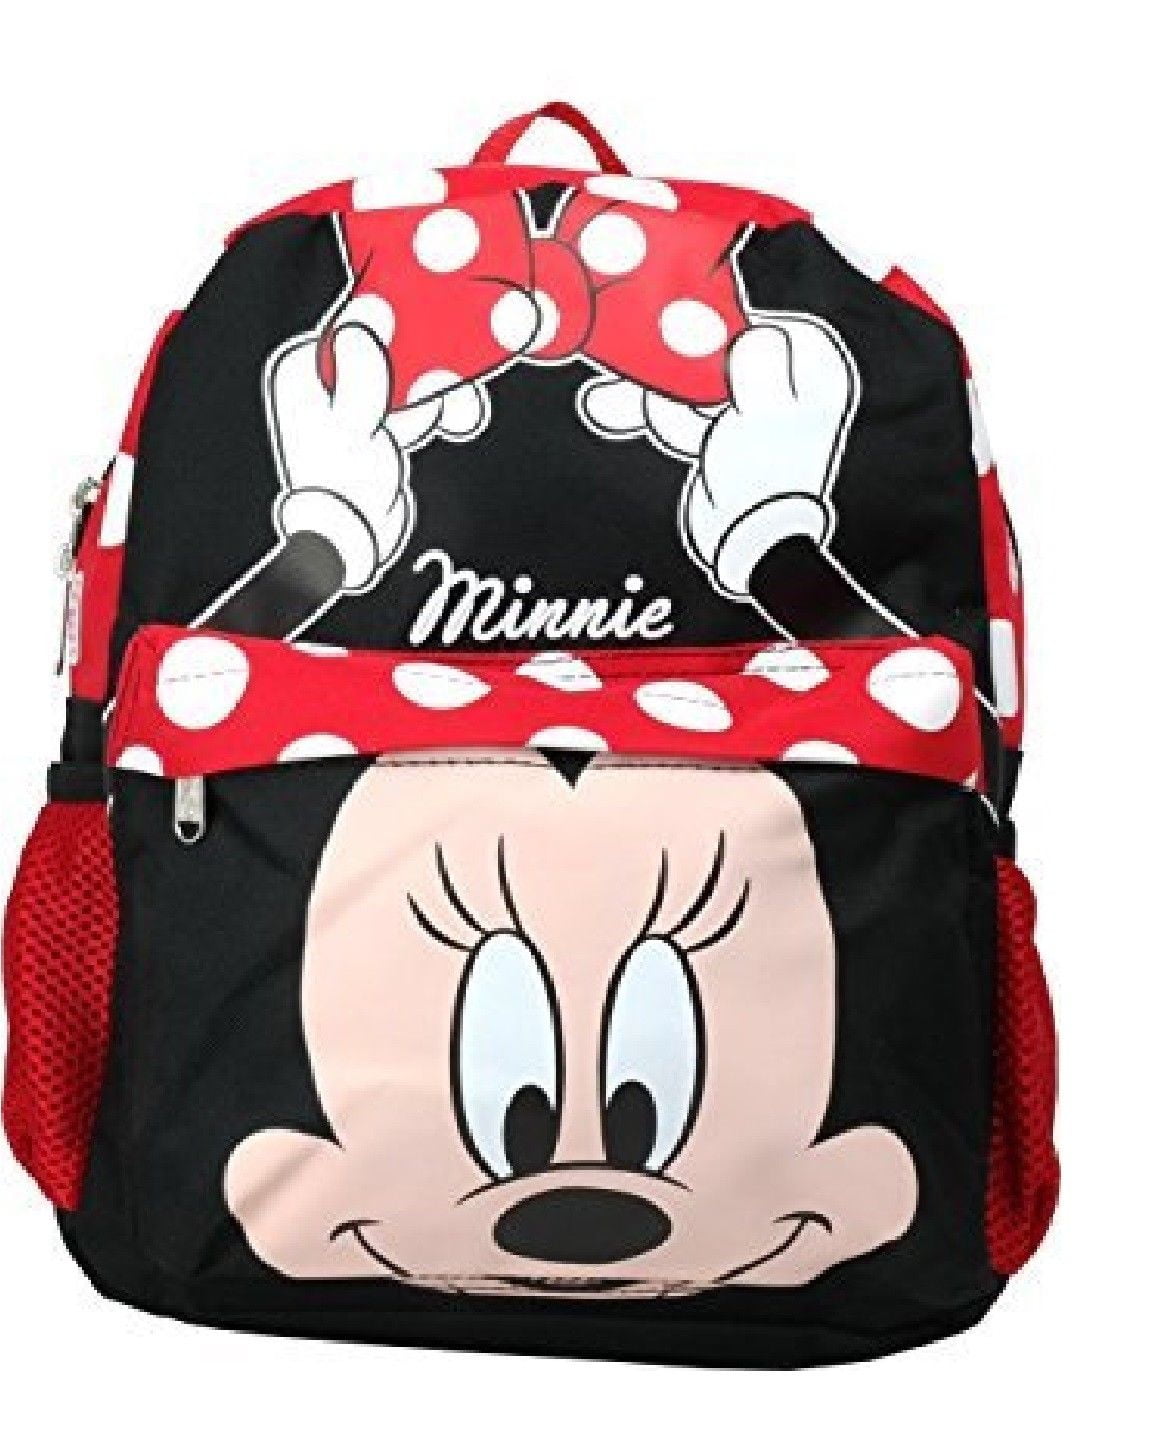 NEW Disney Minnie Mouse 3D Ears & Bow 12" Toddler Girl Backpack School Book Bag 